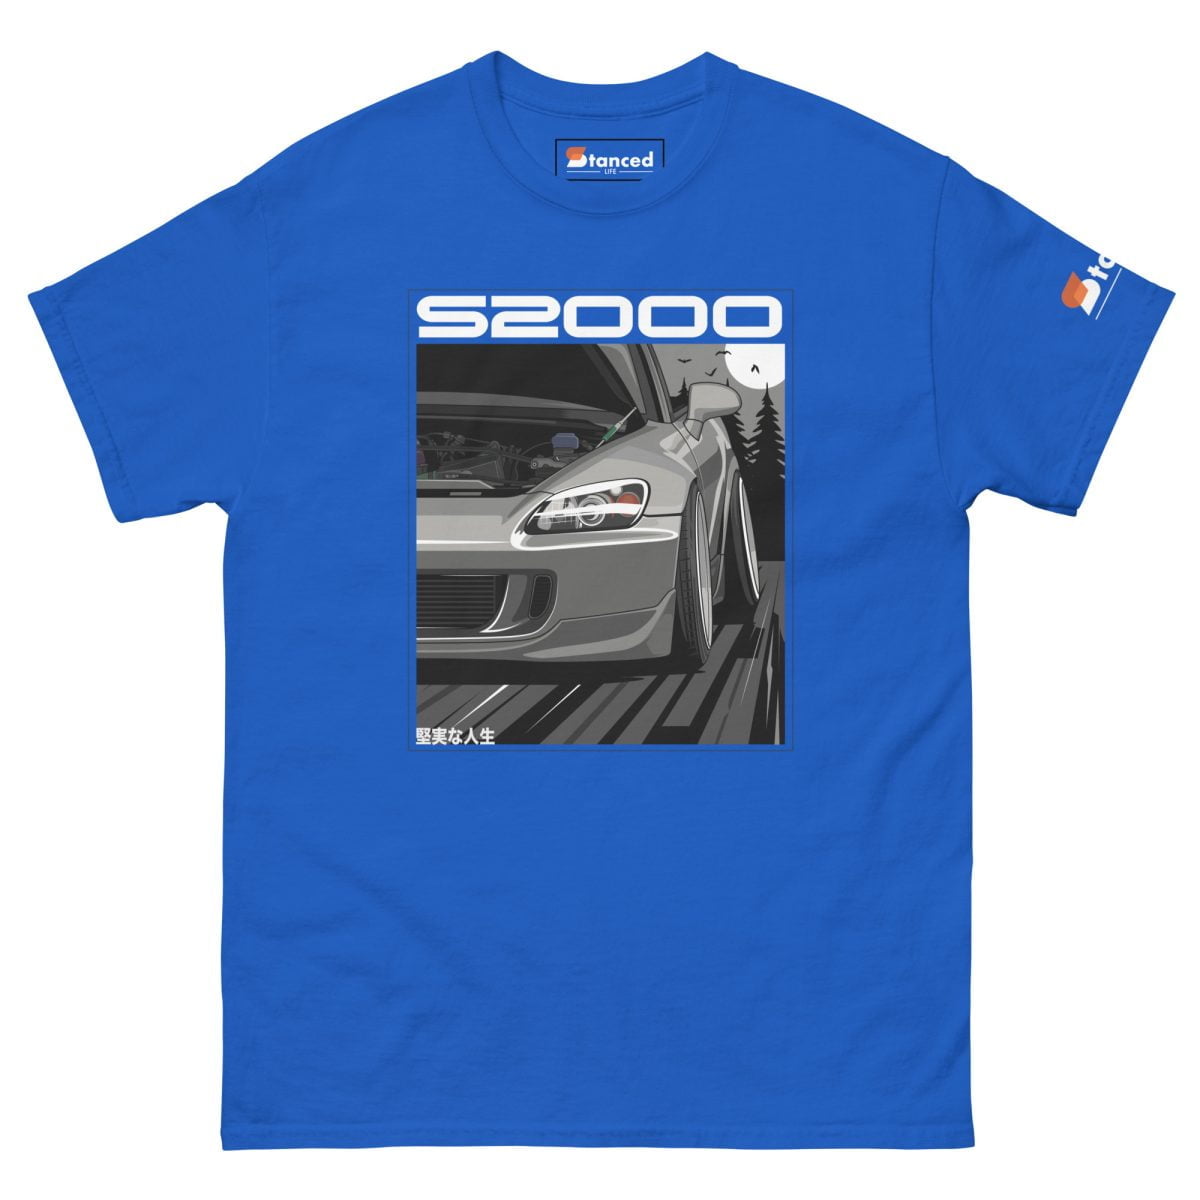 An eye catching Honda S2000 Mens Graphic T shirt featuring the iconic Honda S2000 design on a vibrant blue background | StancedLife